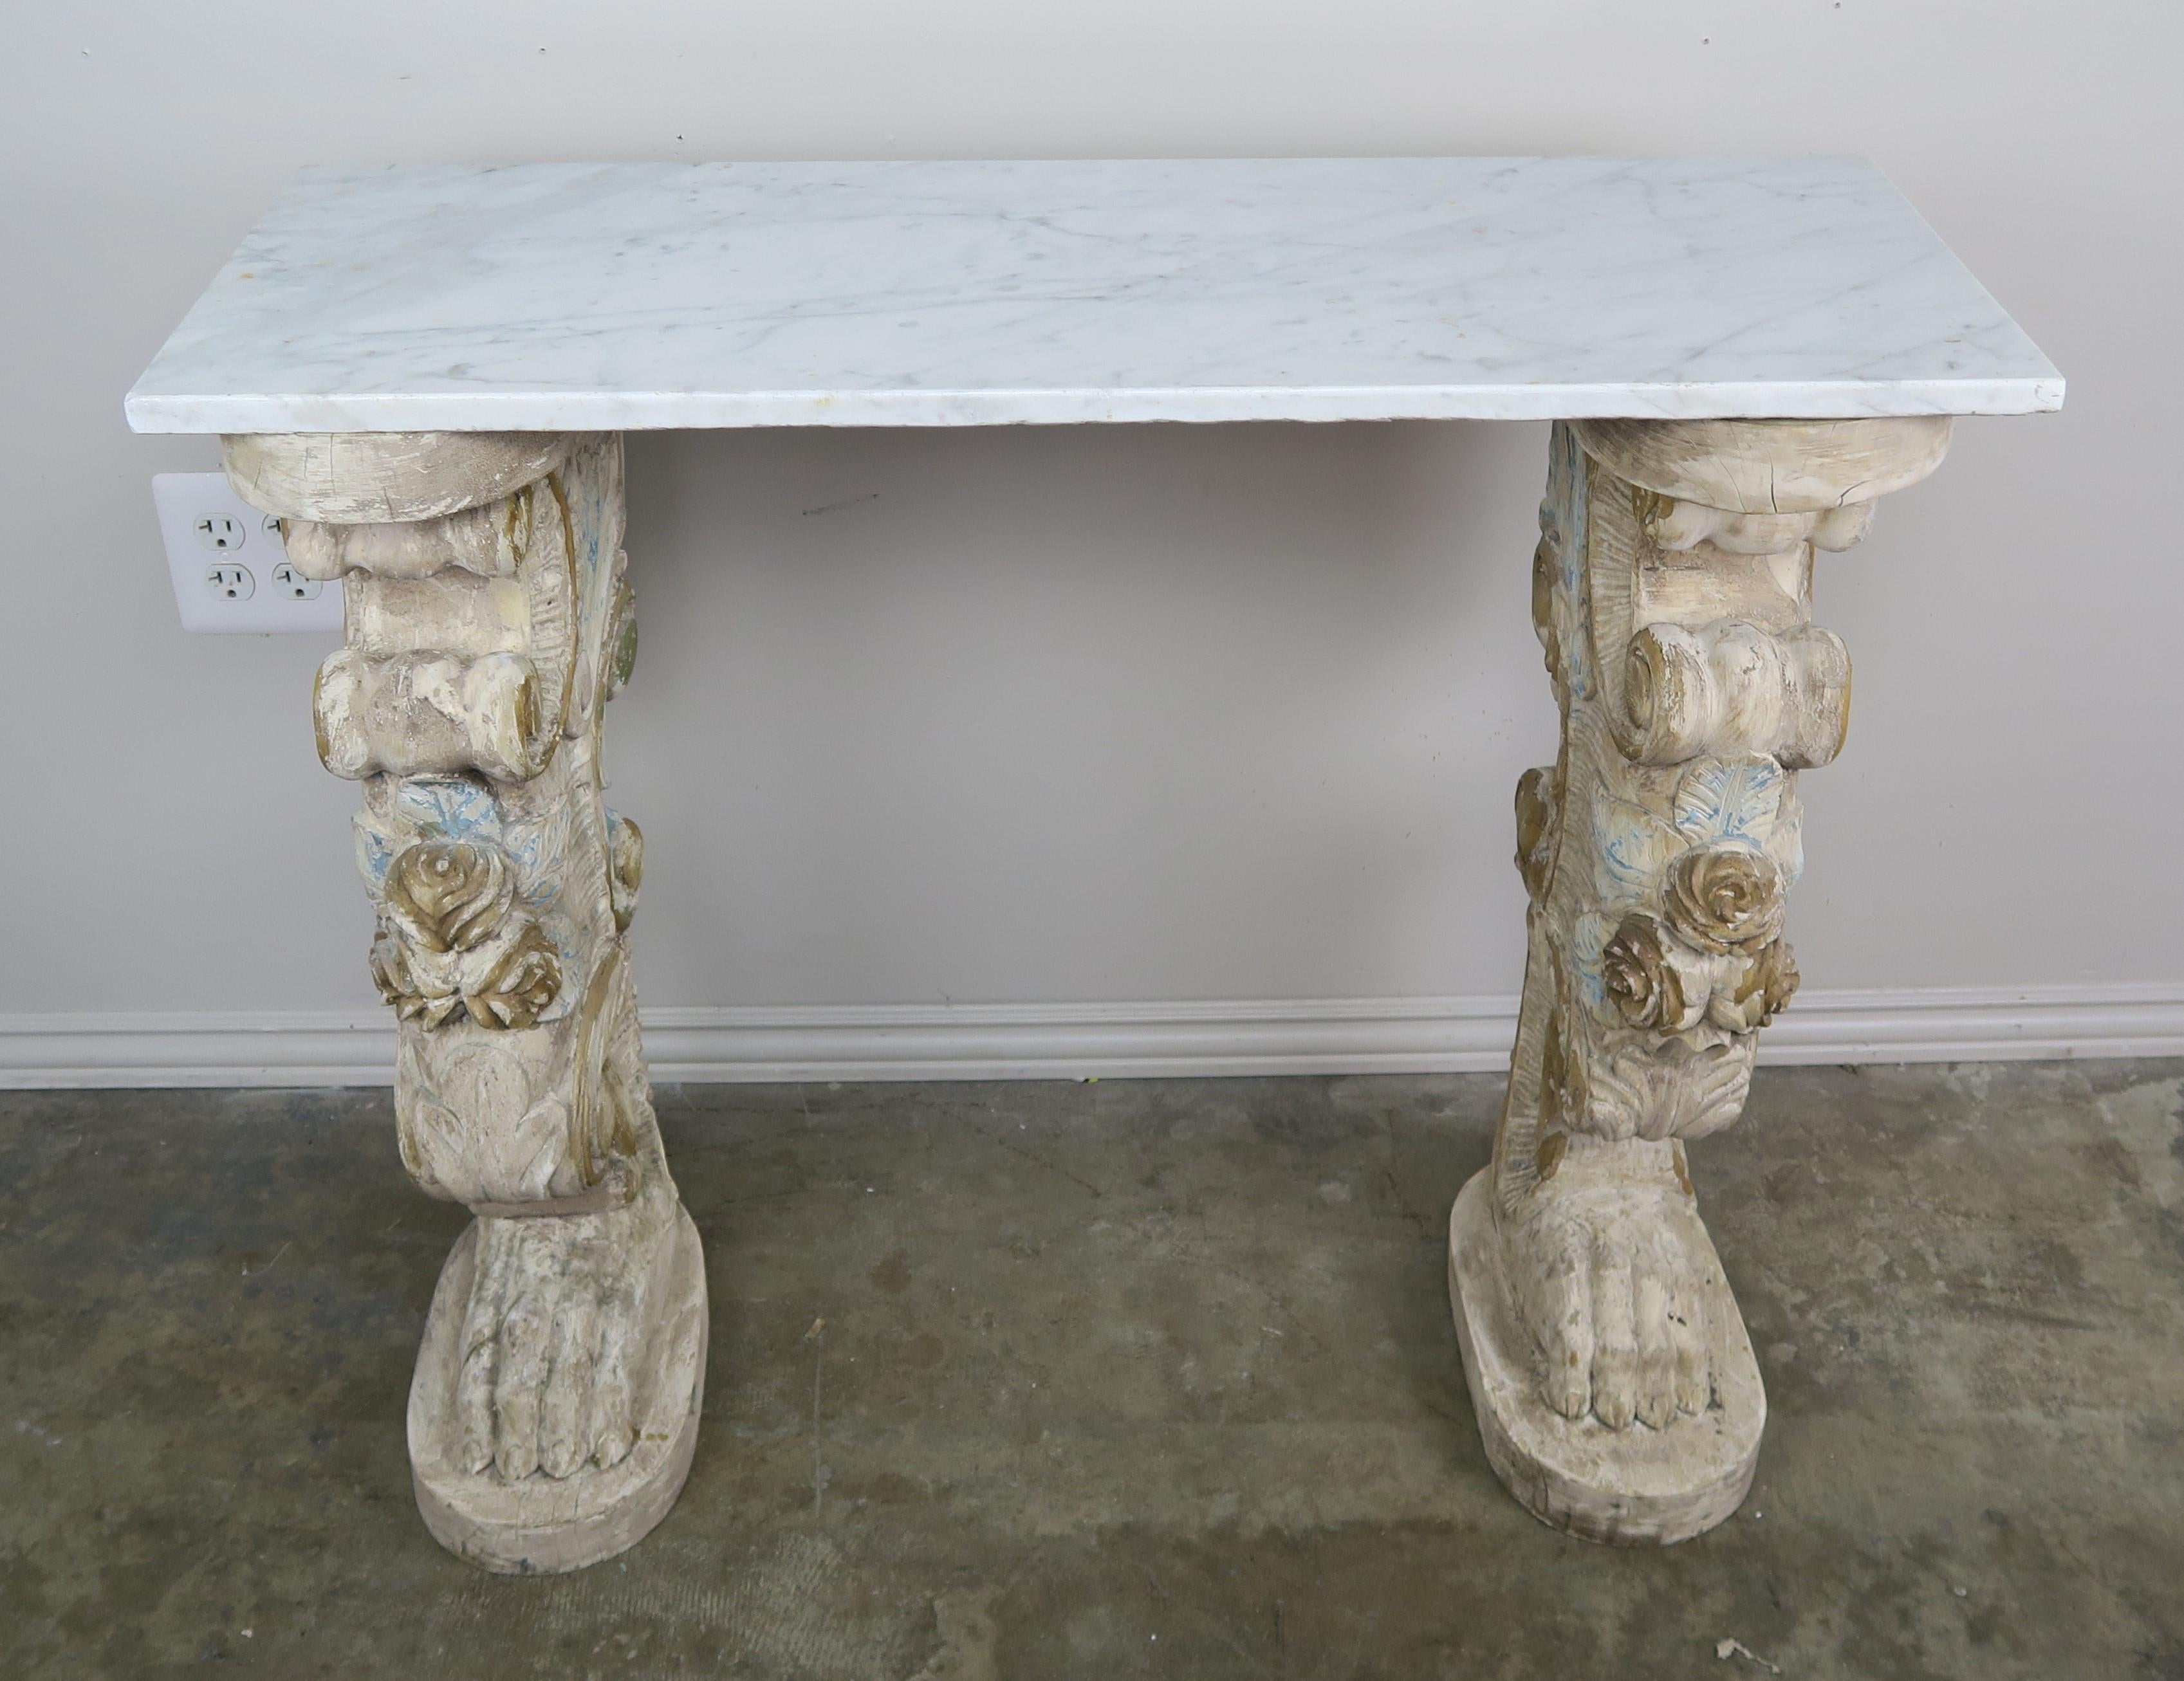 Marble-top console that consists of a Carrara marble top that sits on a pair of Italian carved wood pedestals with paw feet. The pedestals also have intricate carved roses along with scrolls and acanthus leaves throughout.